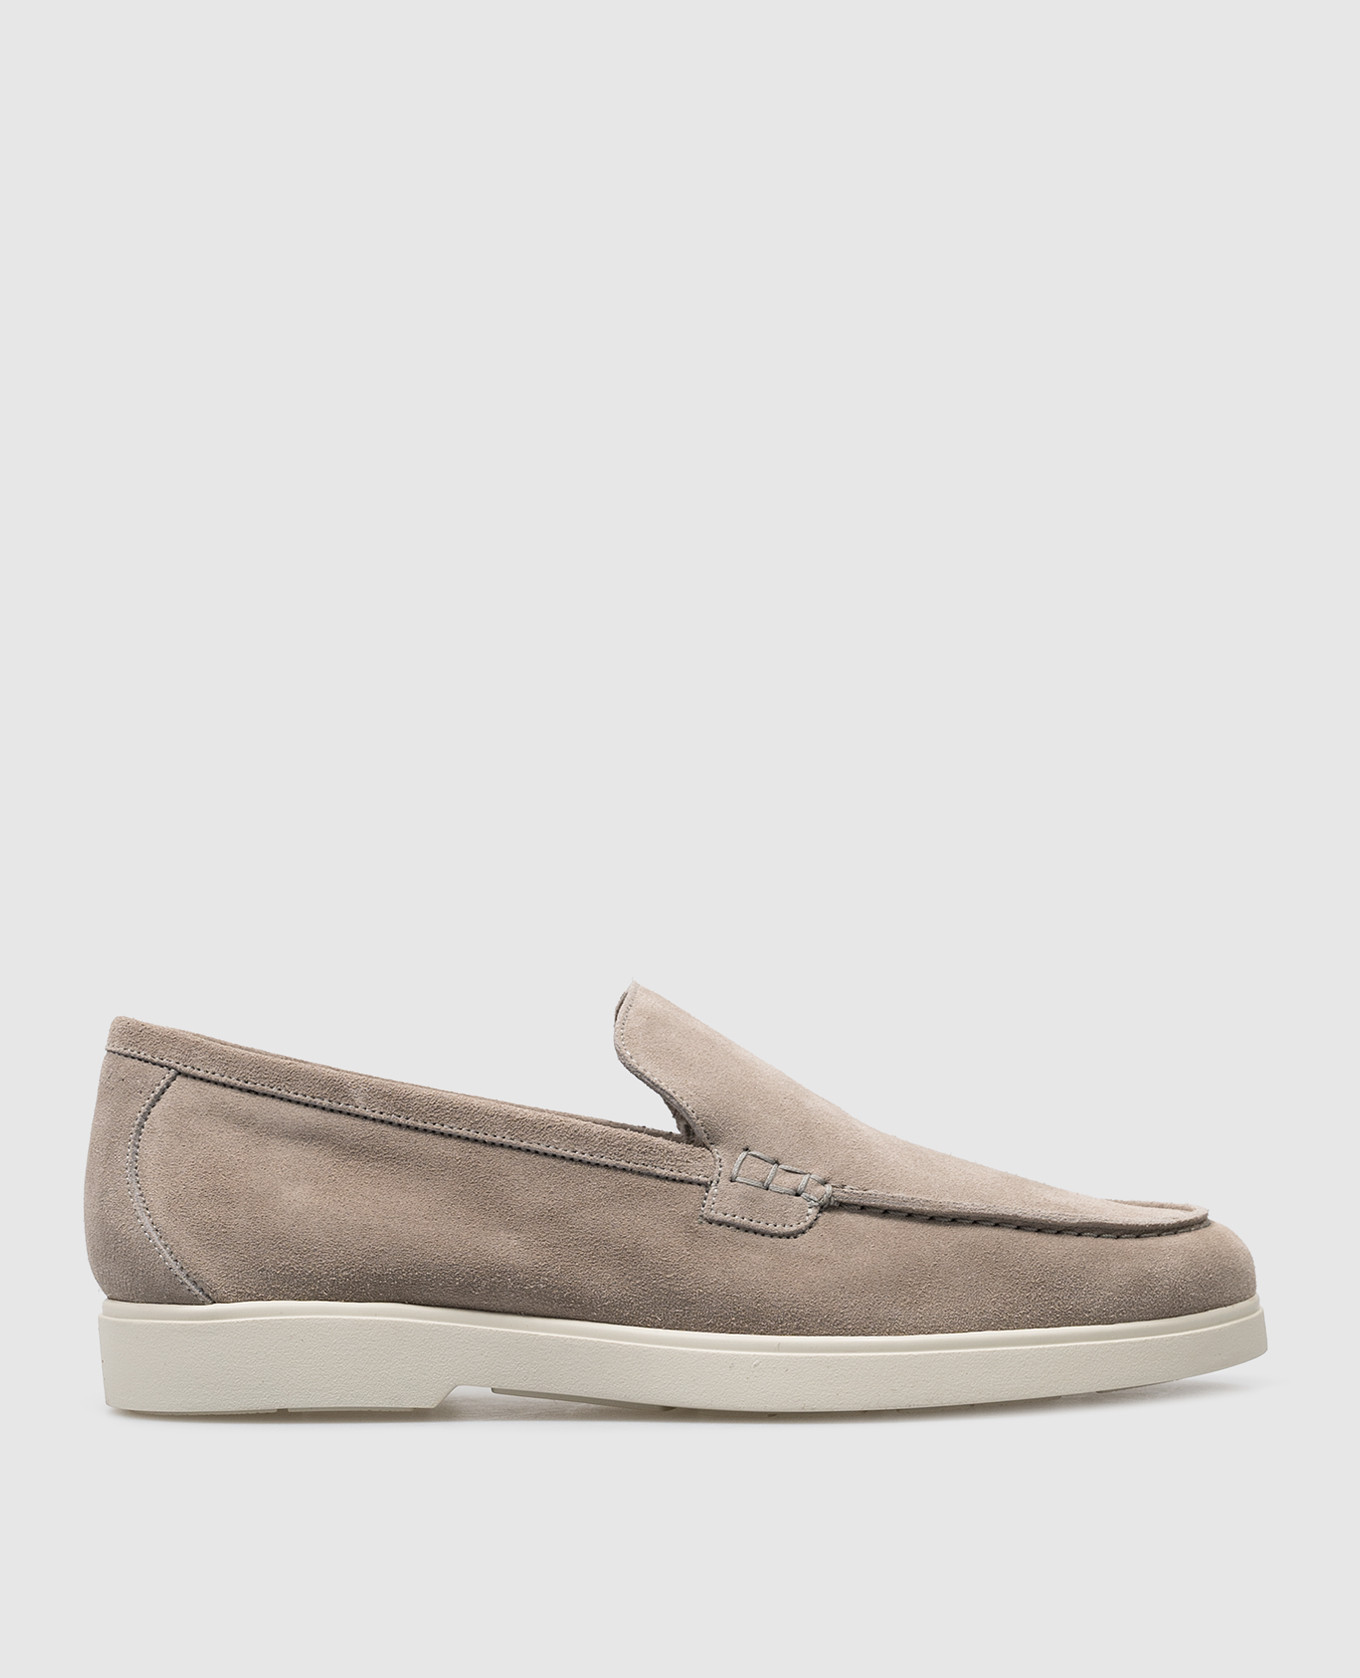 SAVILLE gray suede loafers